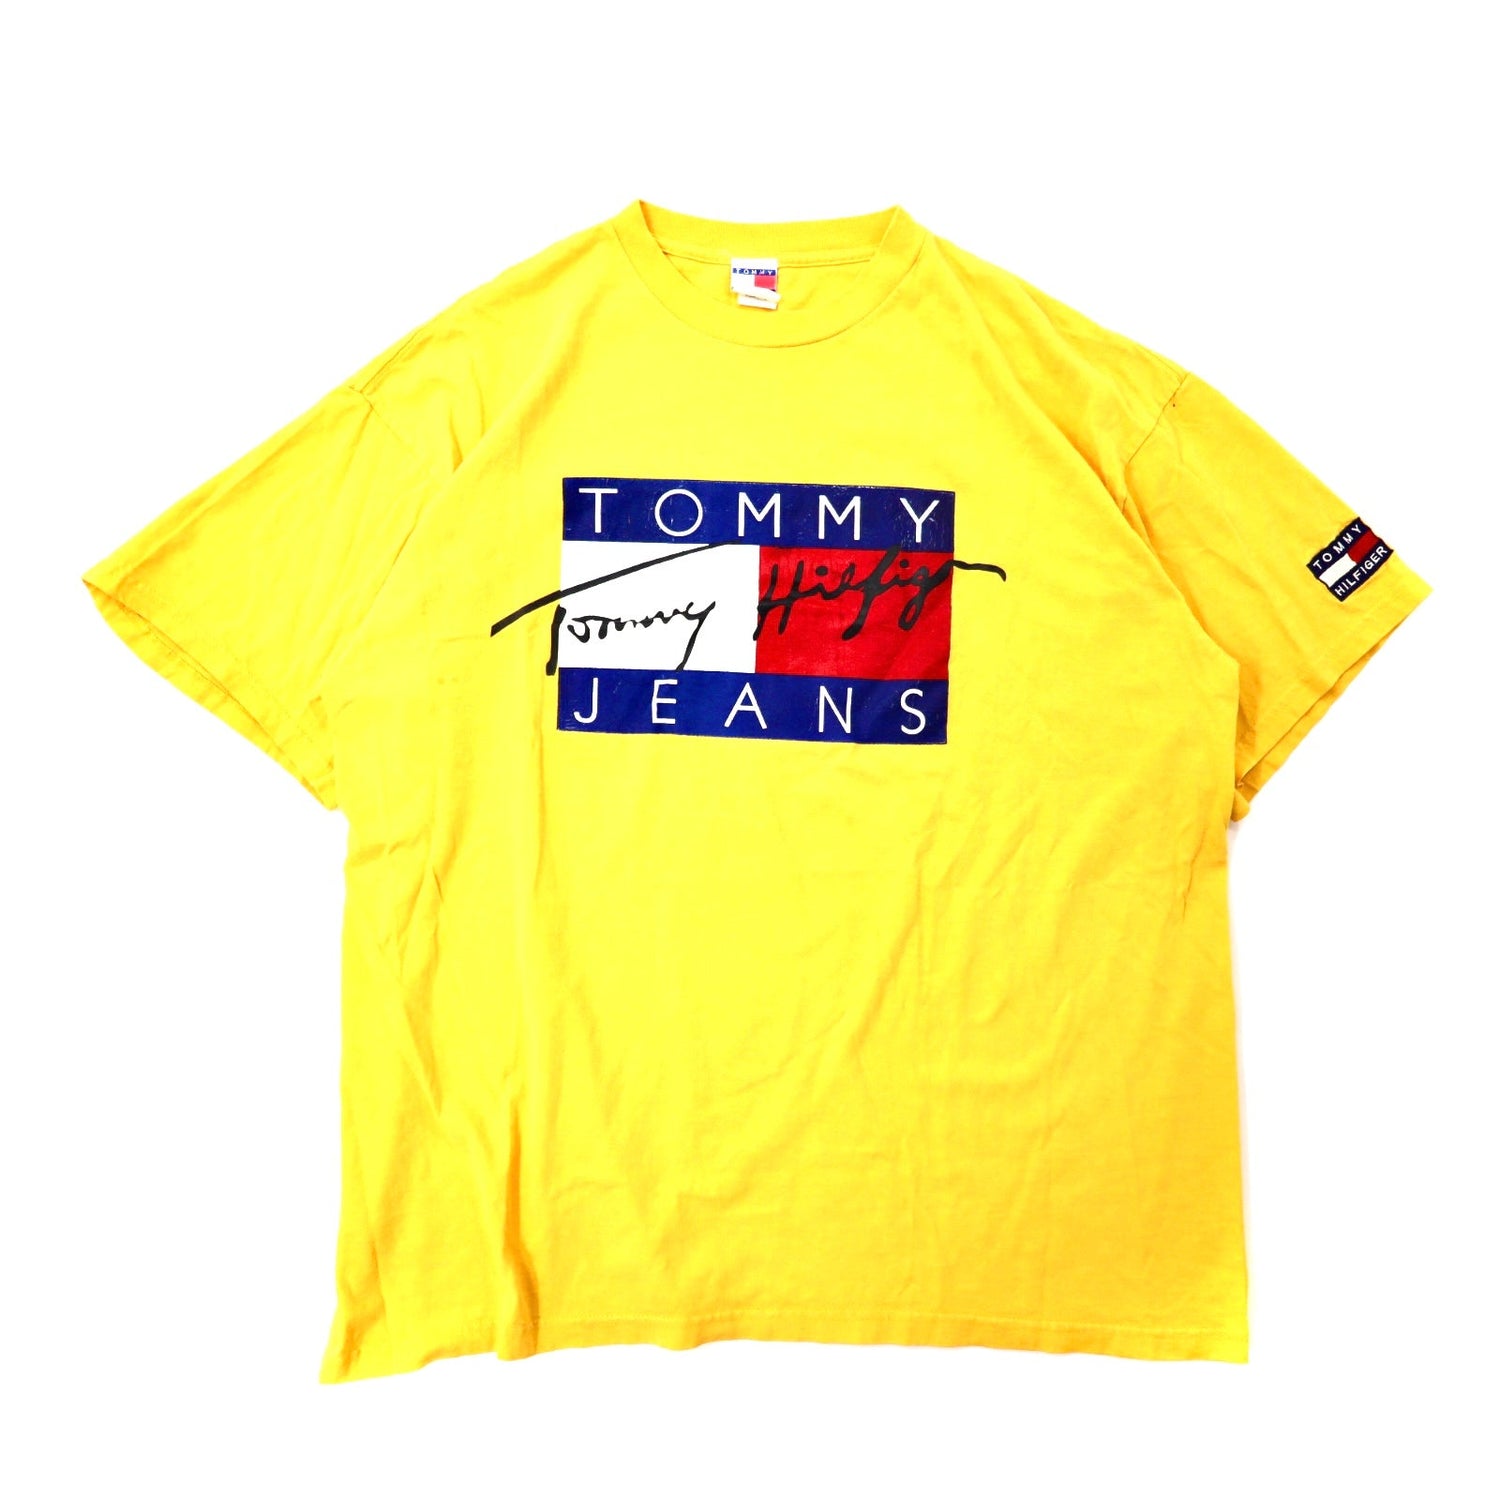 TOMMY HILFIGER ビッグロゴプリントTシャツ XXL イエロー USA製 ビッグサイズ-TOMMY JEANS-古着